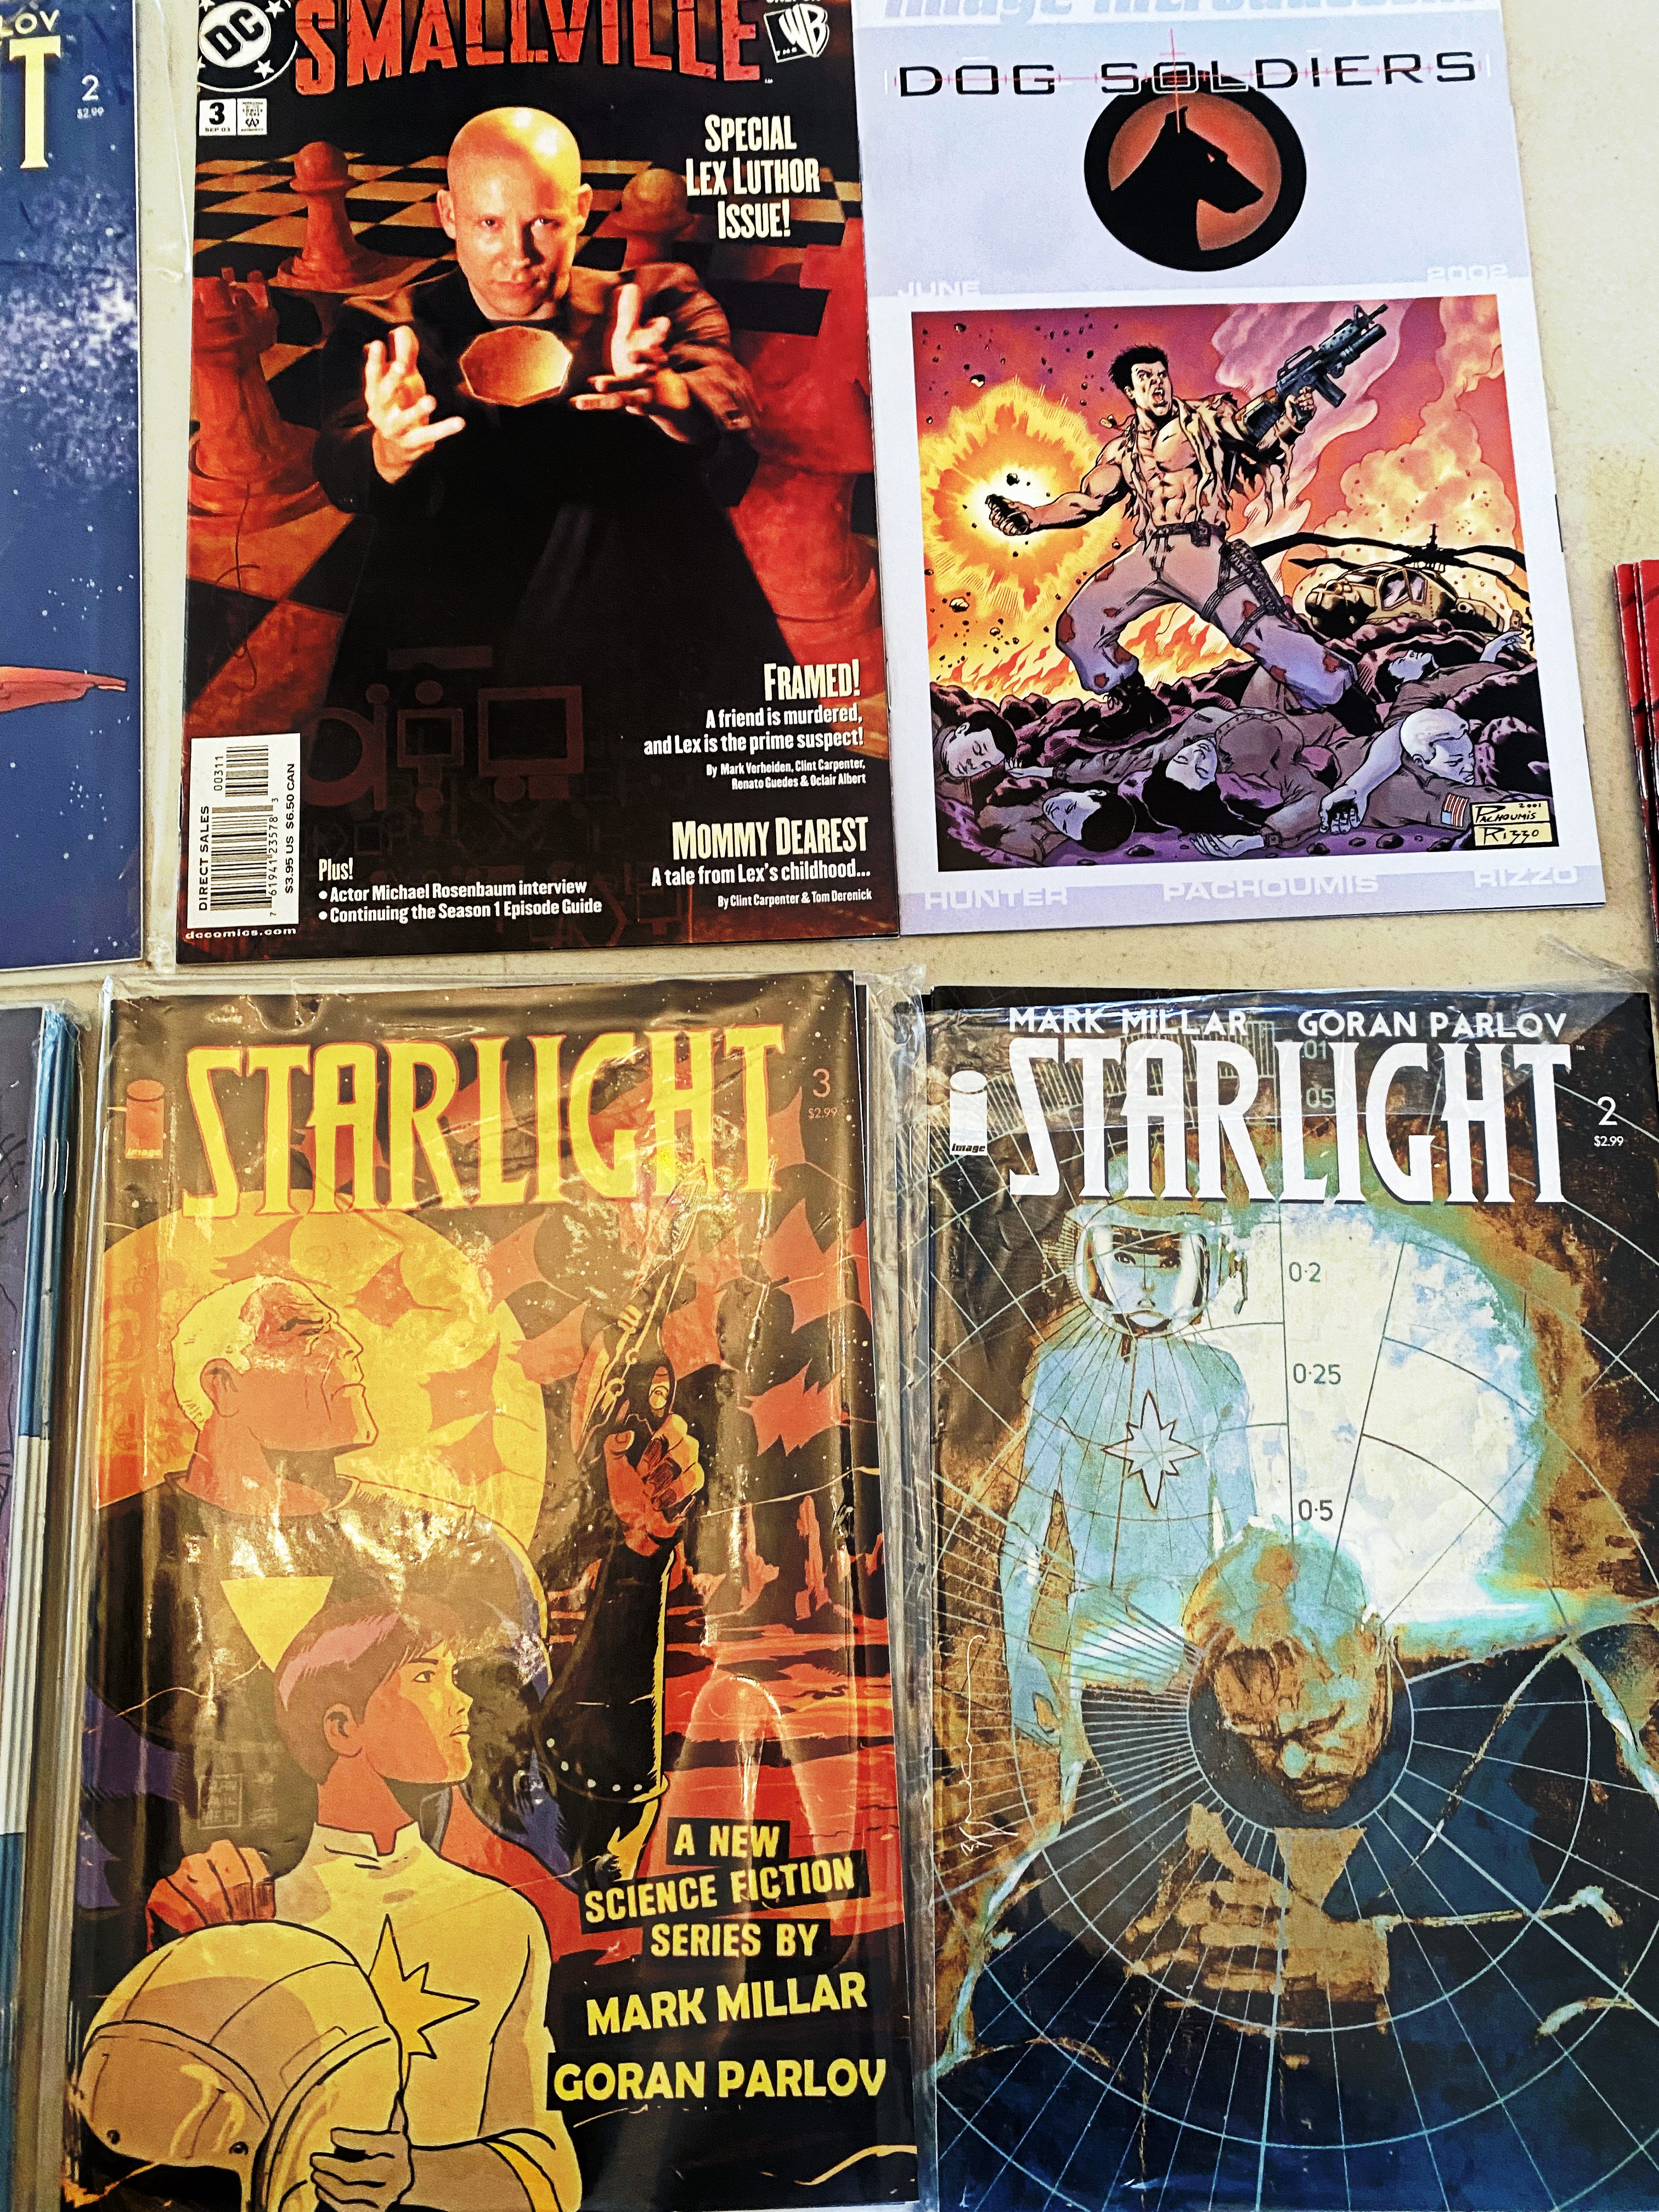 Comic book Drawing of the ThreeI Invanders  Star Light  lot 25 all new